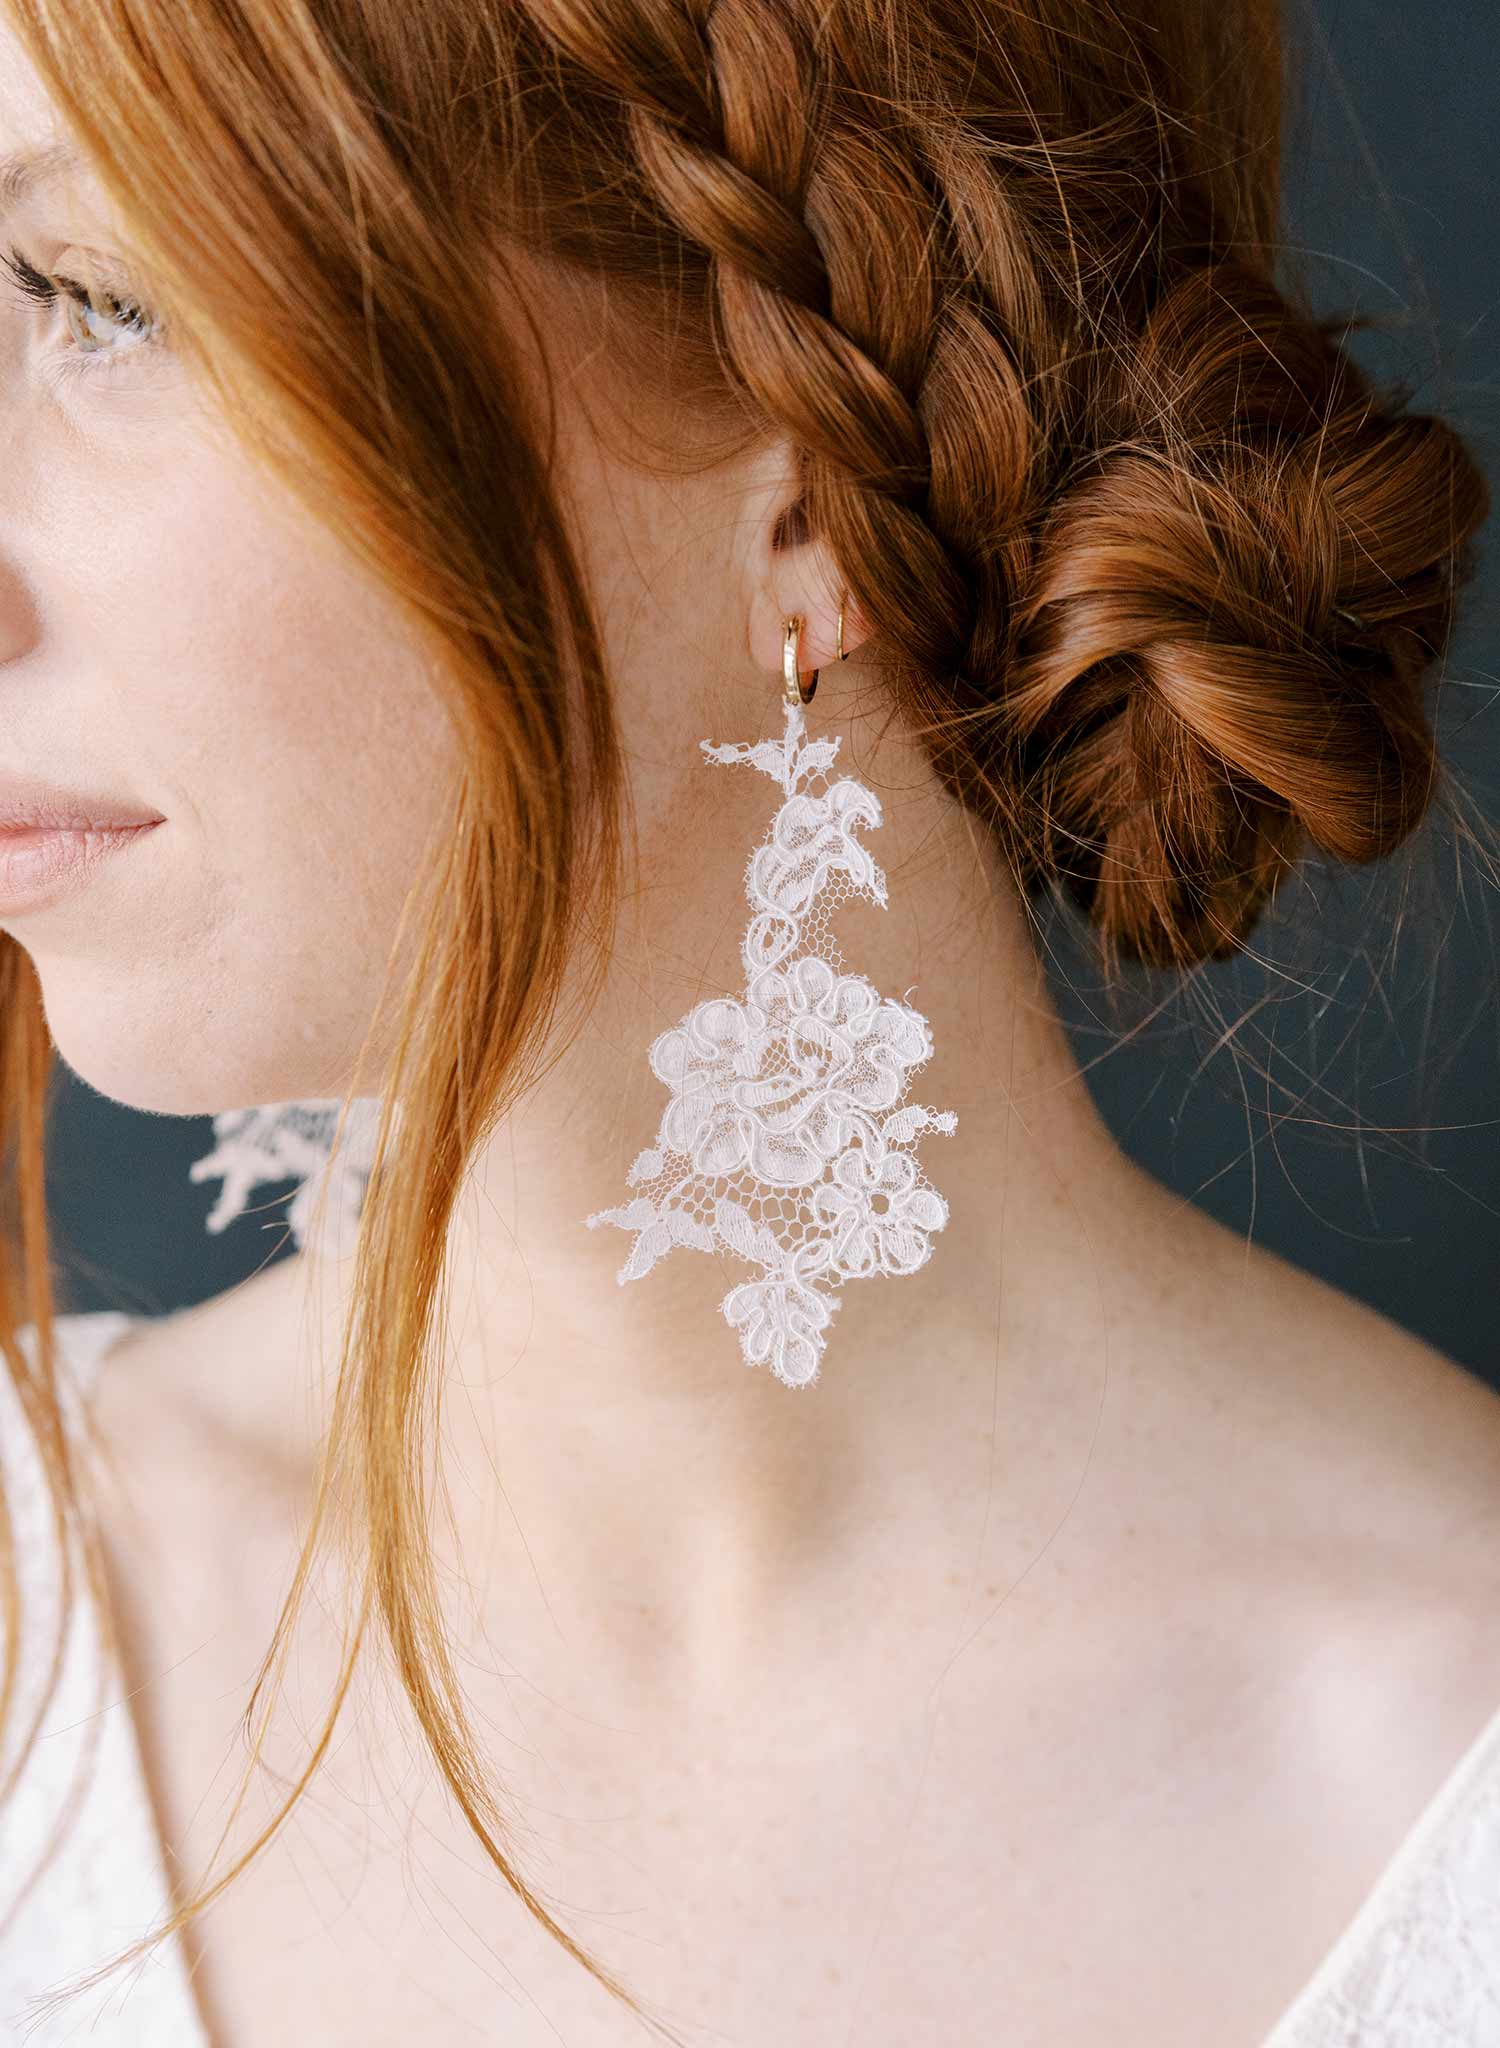 Alencon lace and hoop earrings - Style #2319